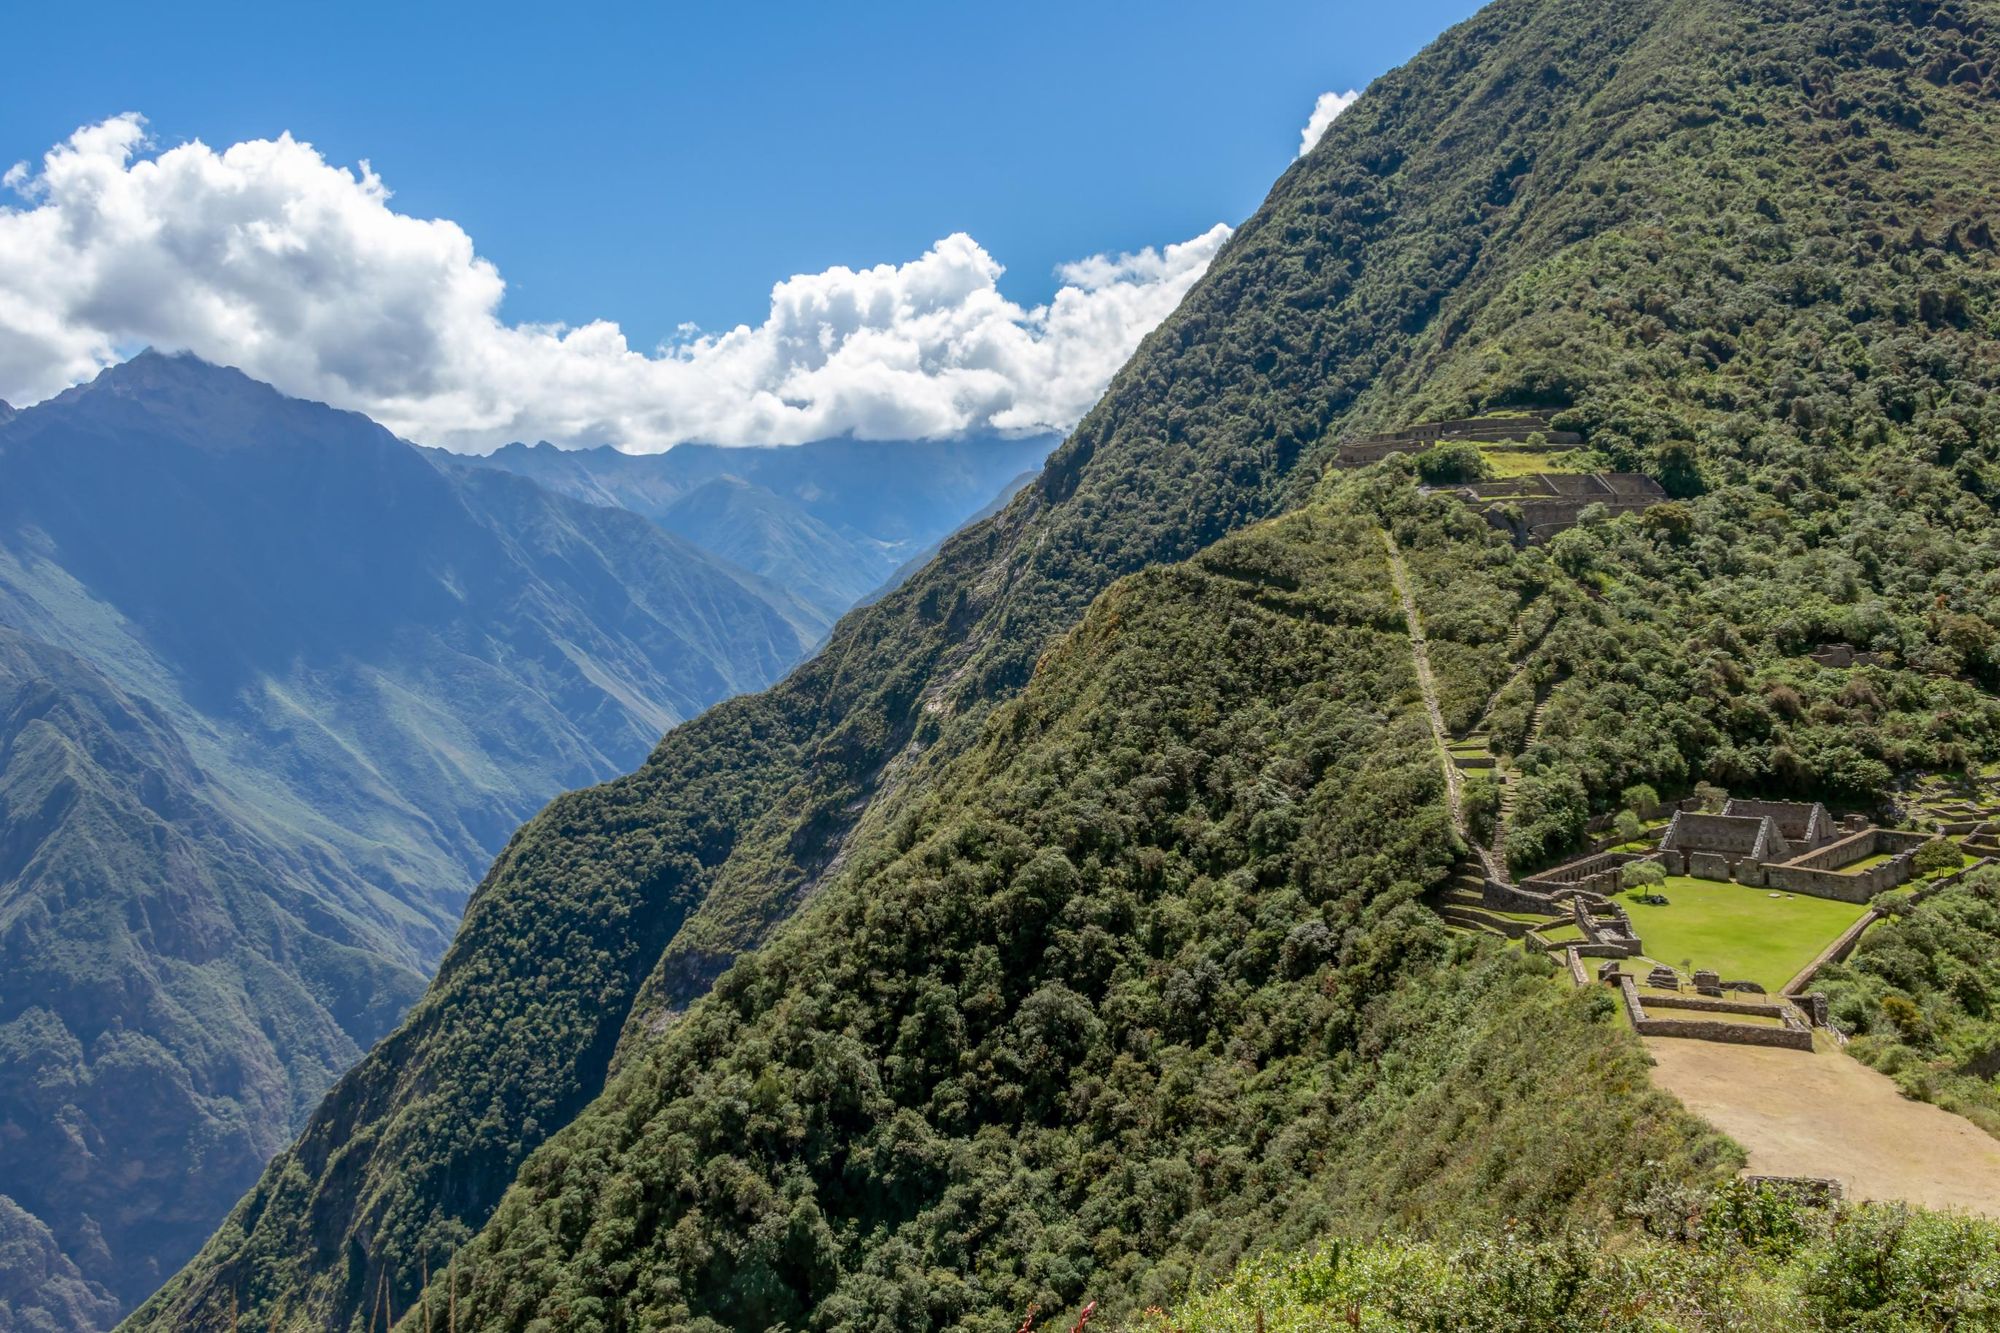 The site of Choquequirao is perched on a mountain slope with sensational views out over the surrounding mountains. Photo: Getty